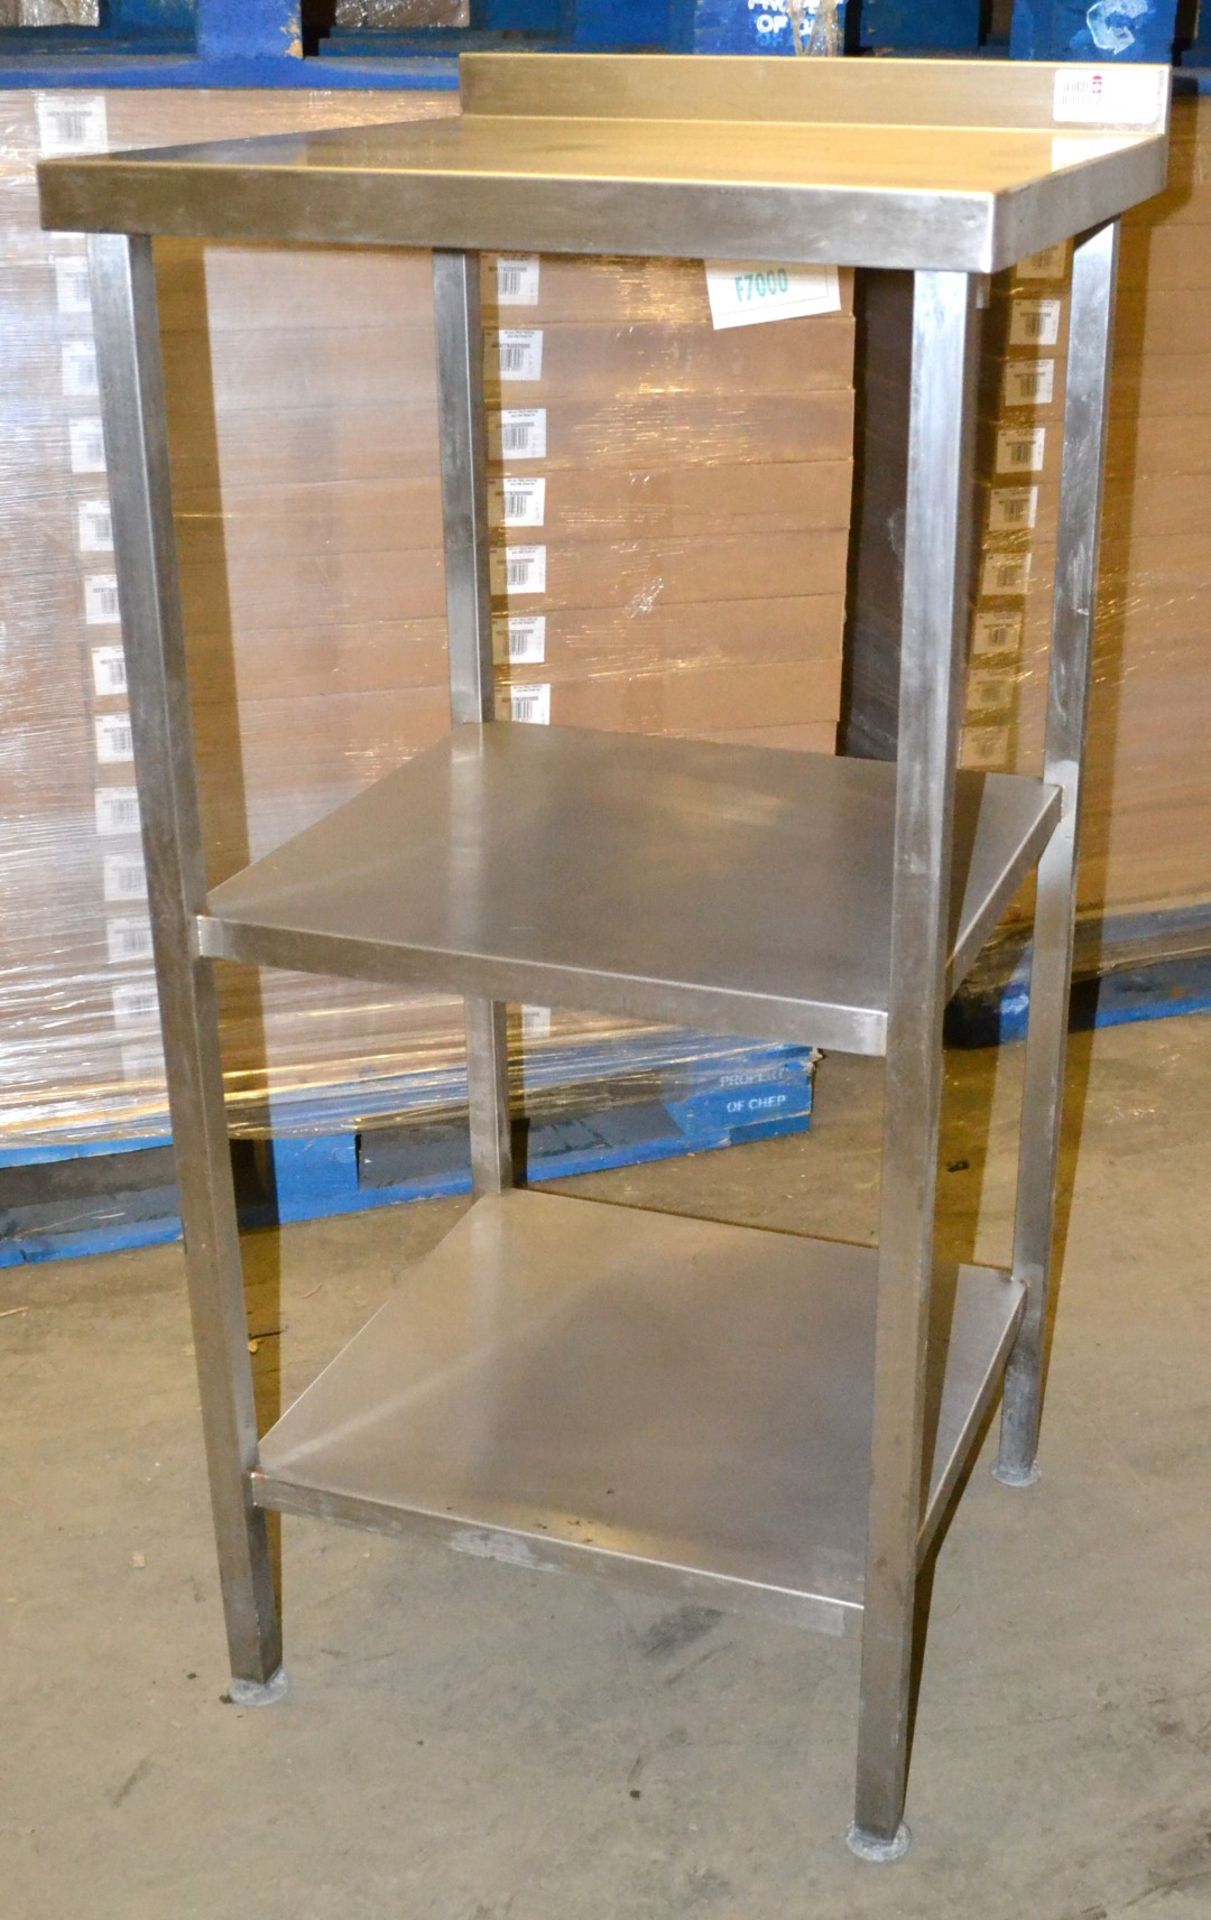 1 x Tall Stainless Steel Scobie McIntosh Prep Table - Dimensions: 60 x 65 x 124cm - Ref: MC115 - CL2 - Image 2 of 8